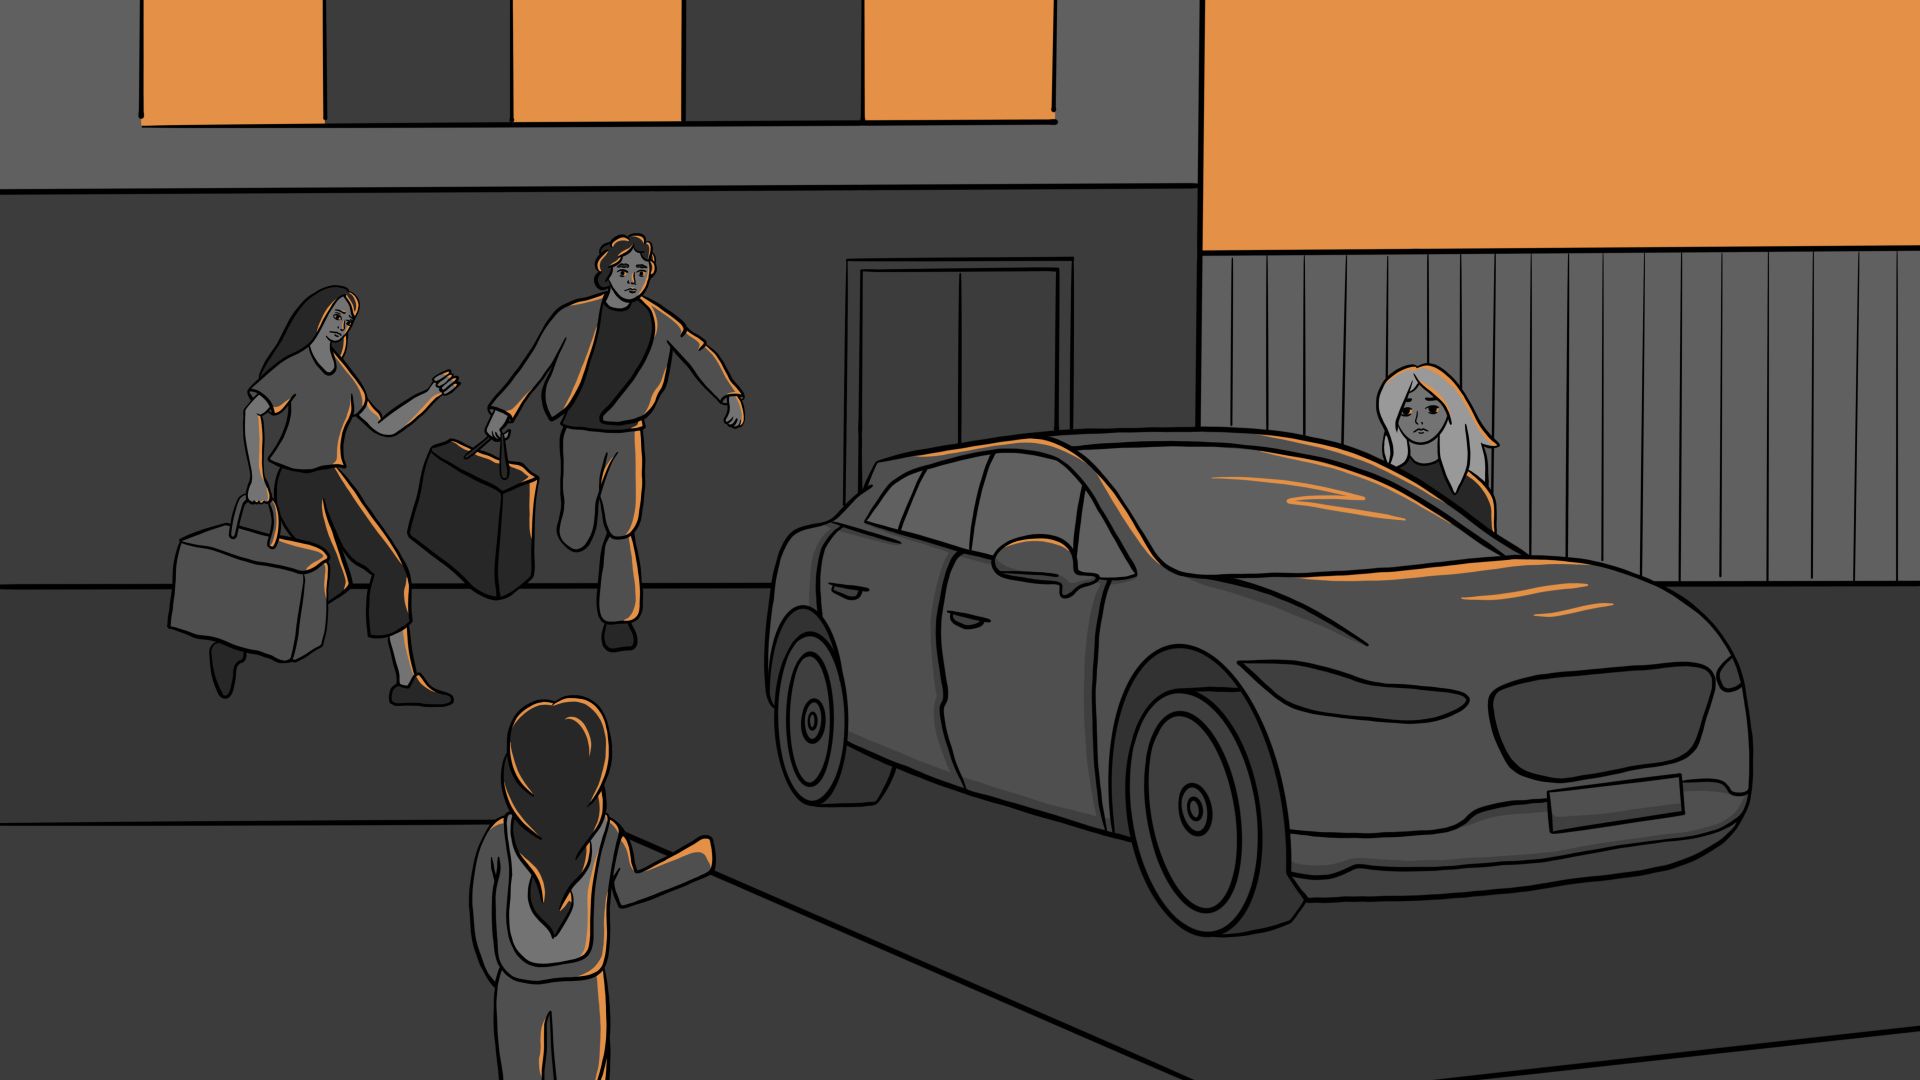 An illustration of people walking towards a car holding bags and suitcases.